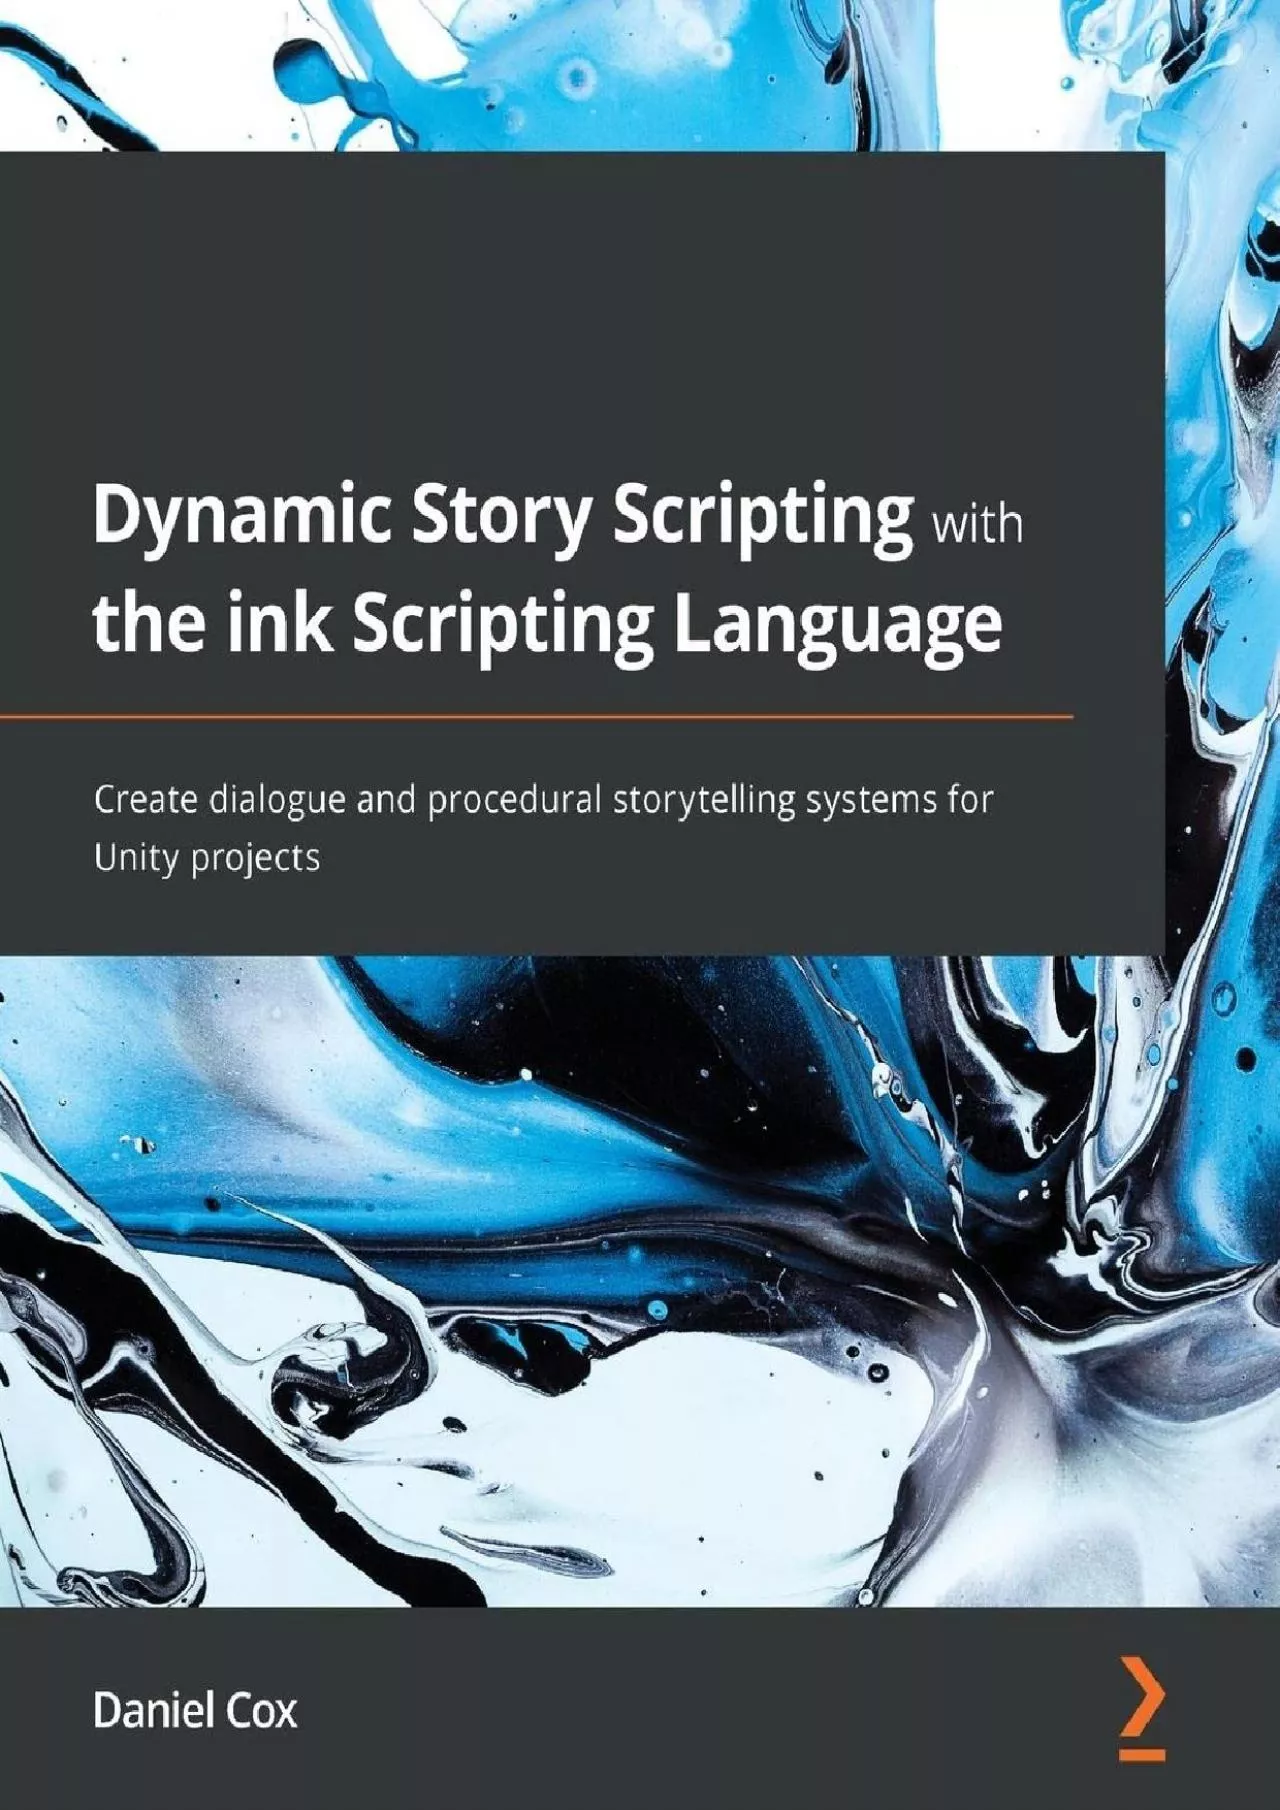 [BEST]-Dynamic Story Scripting with the ink Scripting Language: Create dialogue and procedural